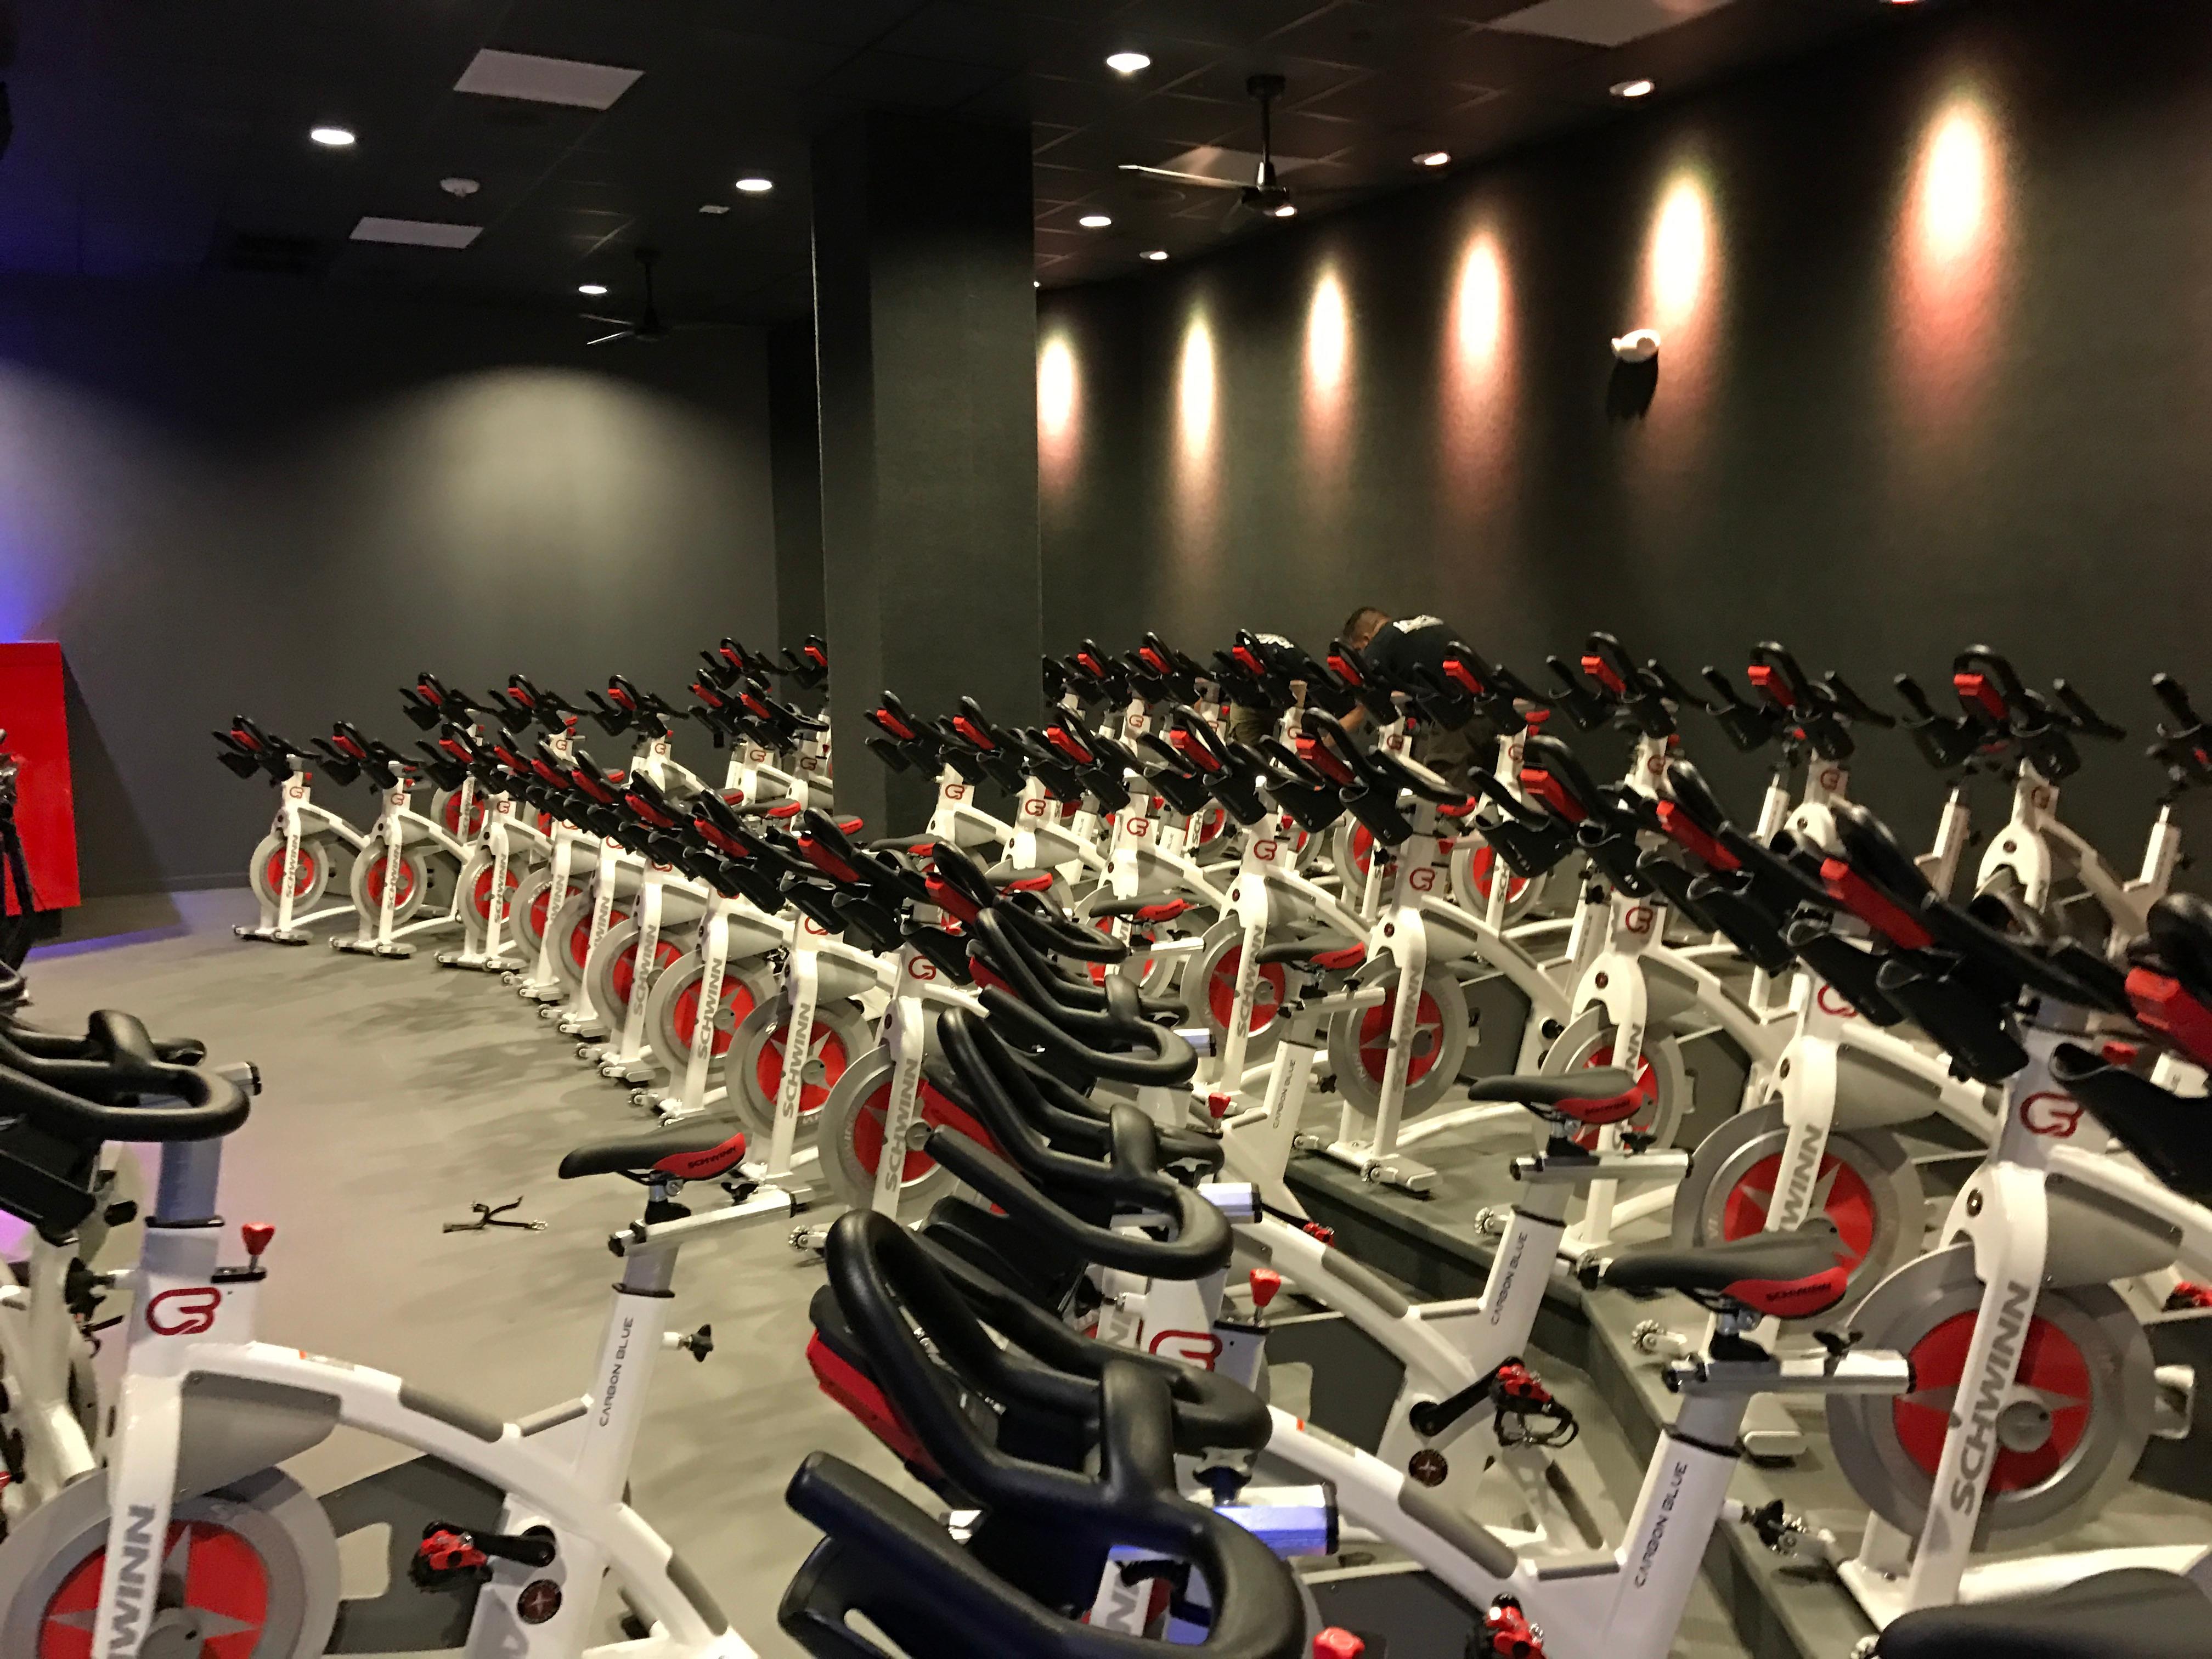 3 Things I Have Learned After 3 Weeks Riding with CYCLEBAR Columbia Pike